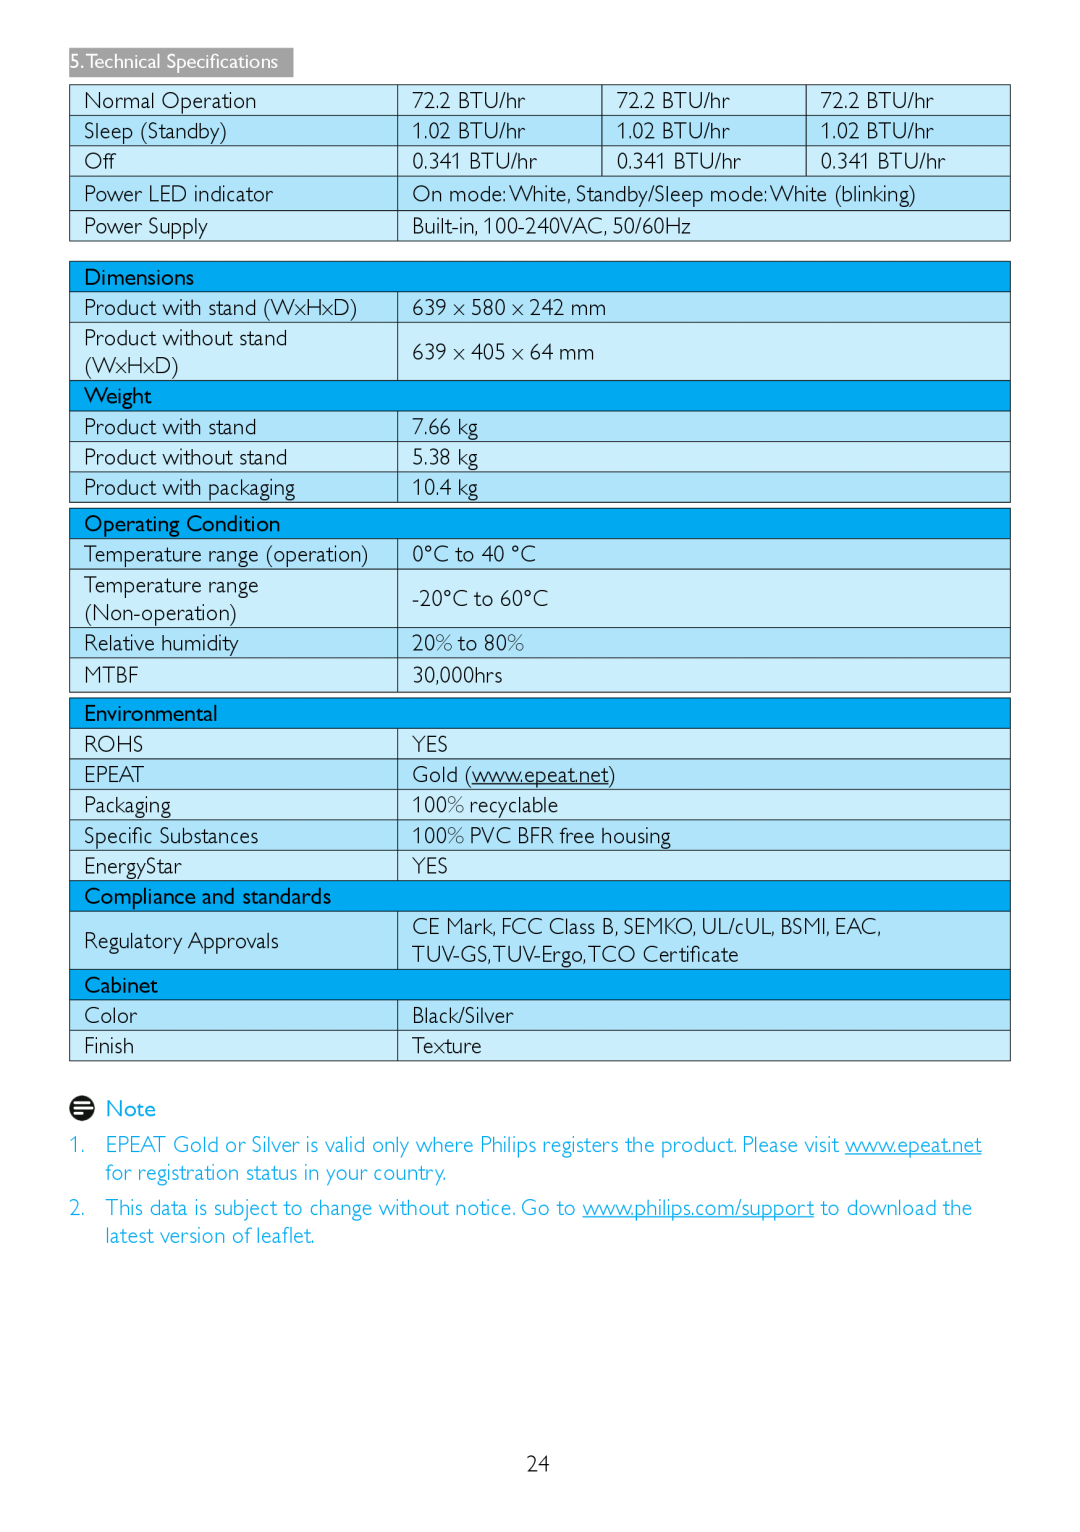 Philips 271S4LPYEB user manual Technical Specifications, 639 x 580 x 242 mm, Temperature range operation 